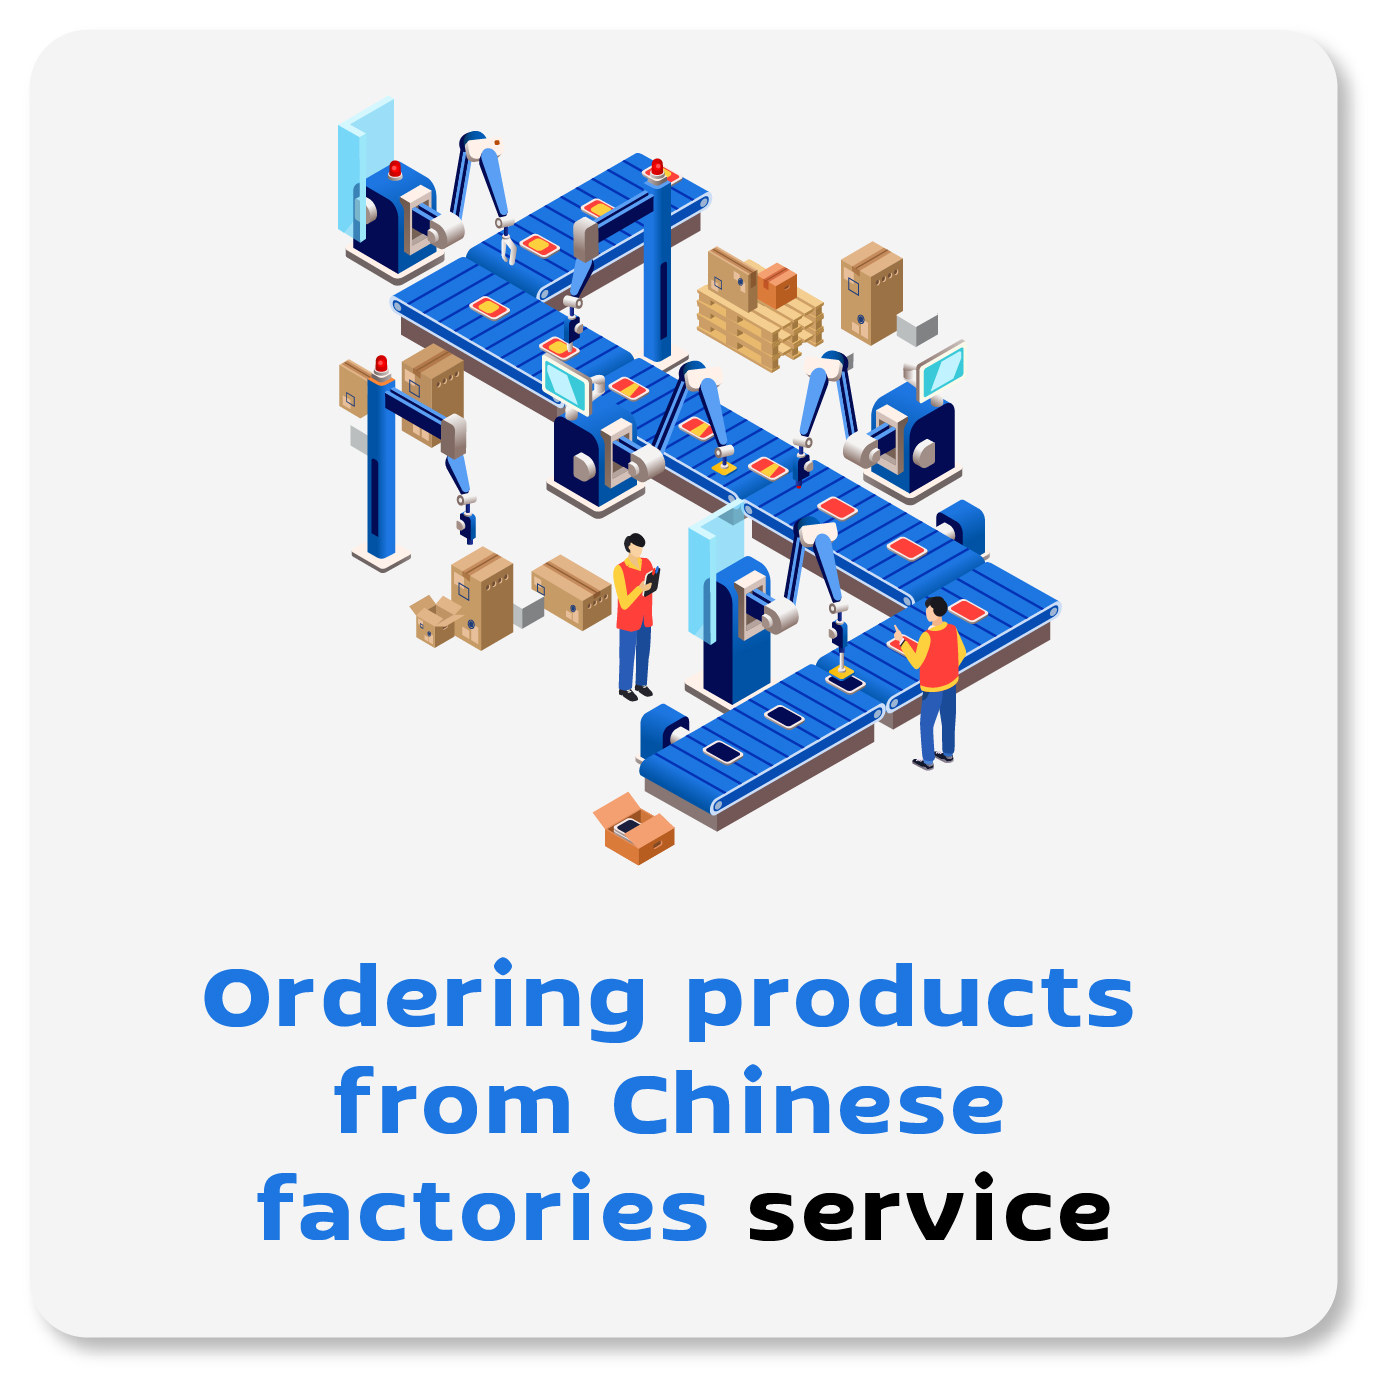 Service to order products from Chinese factories.